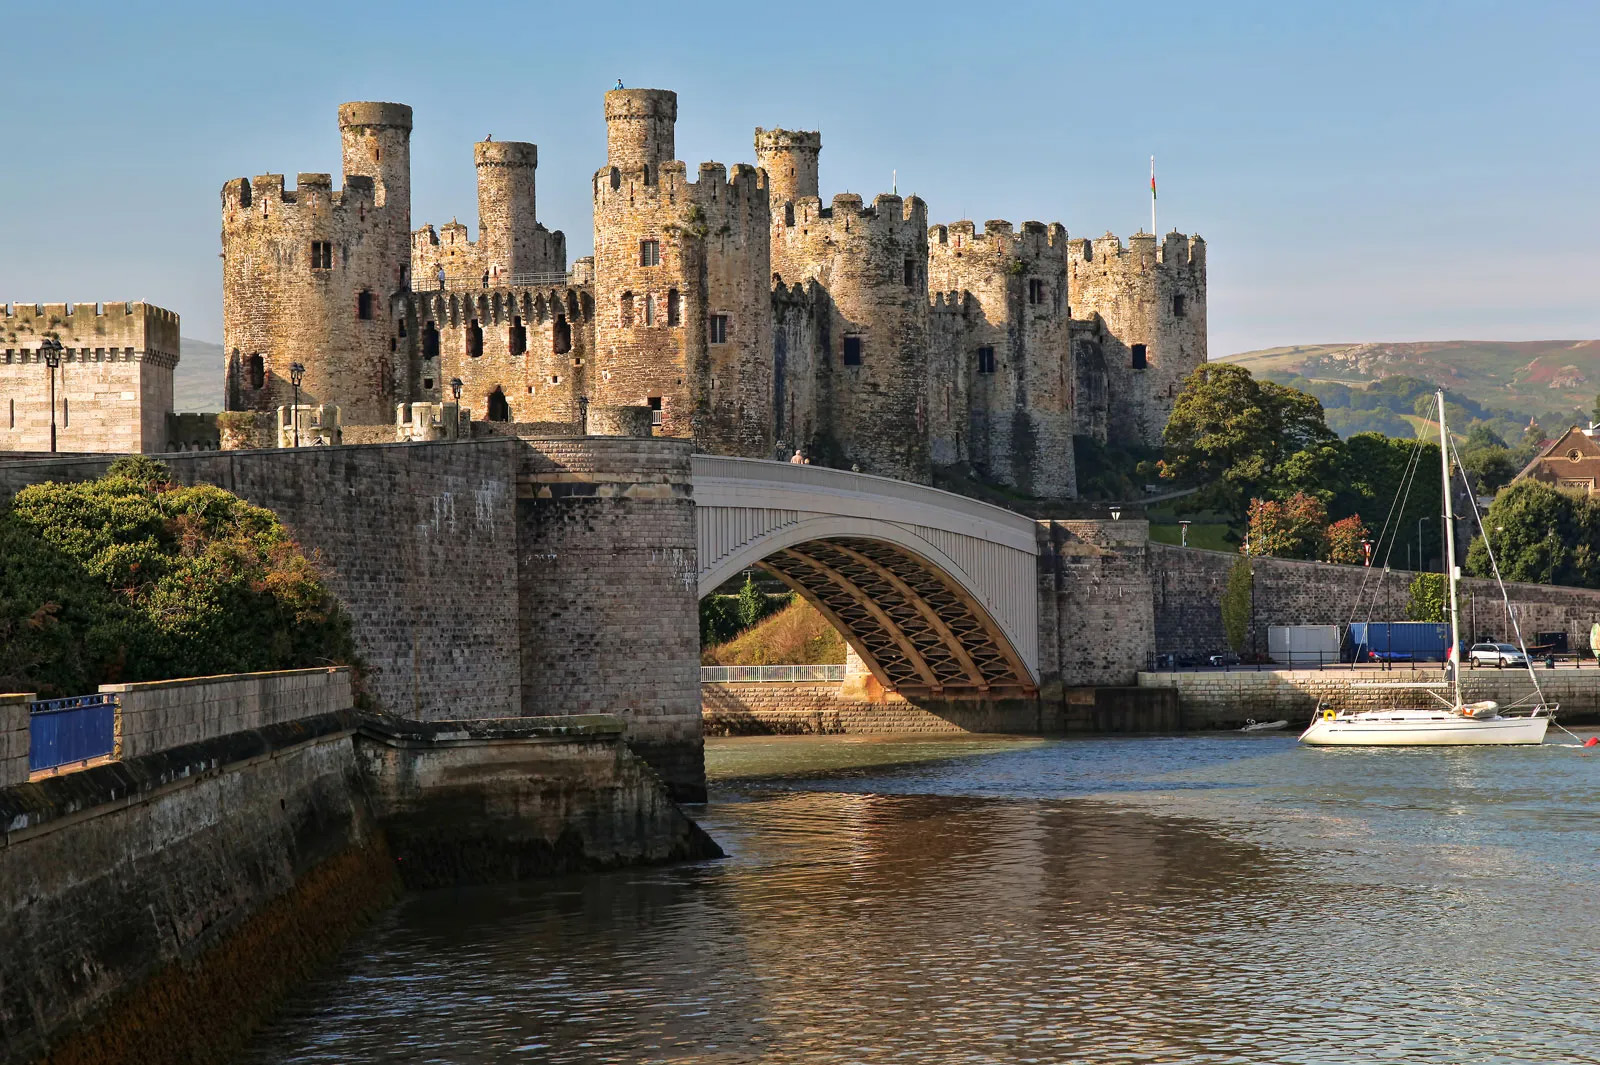 39 interesting facts about Wales